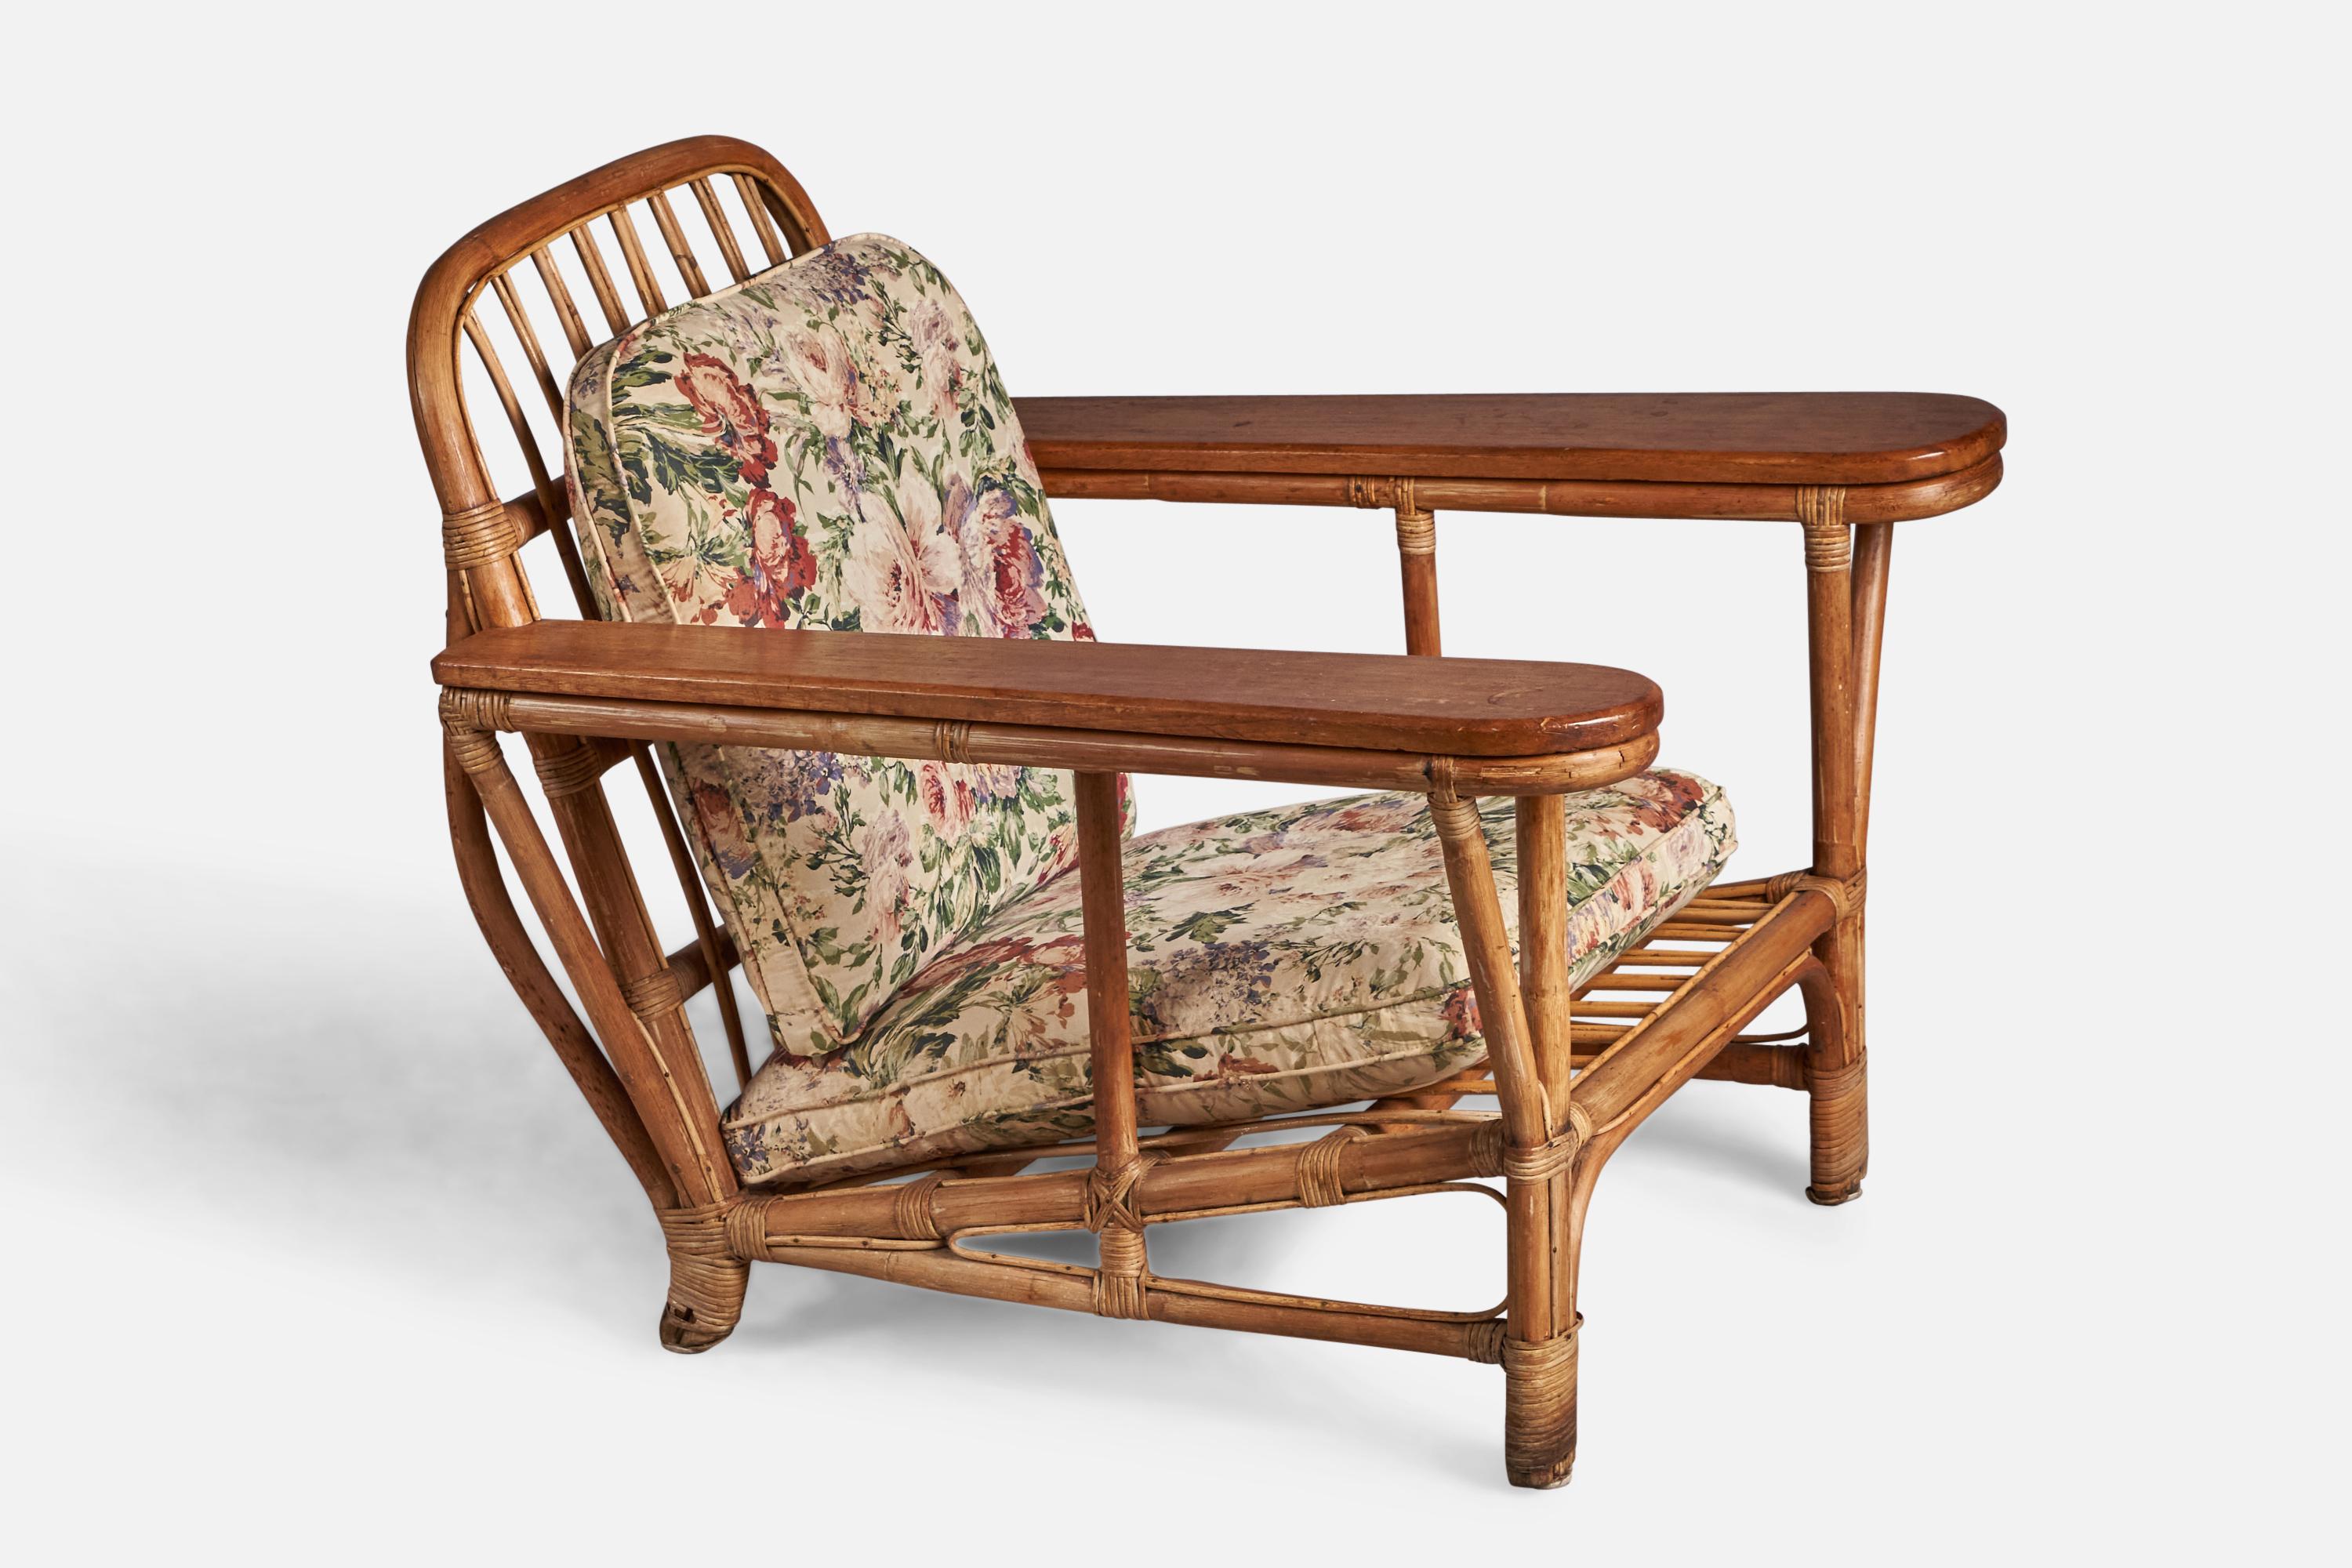 A bamboo, rattan, teak and floral-printed vintage fabric lounge chair designed and produced in the US, 1950.

15” seat height